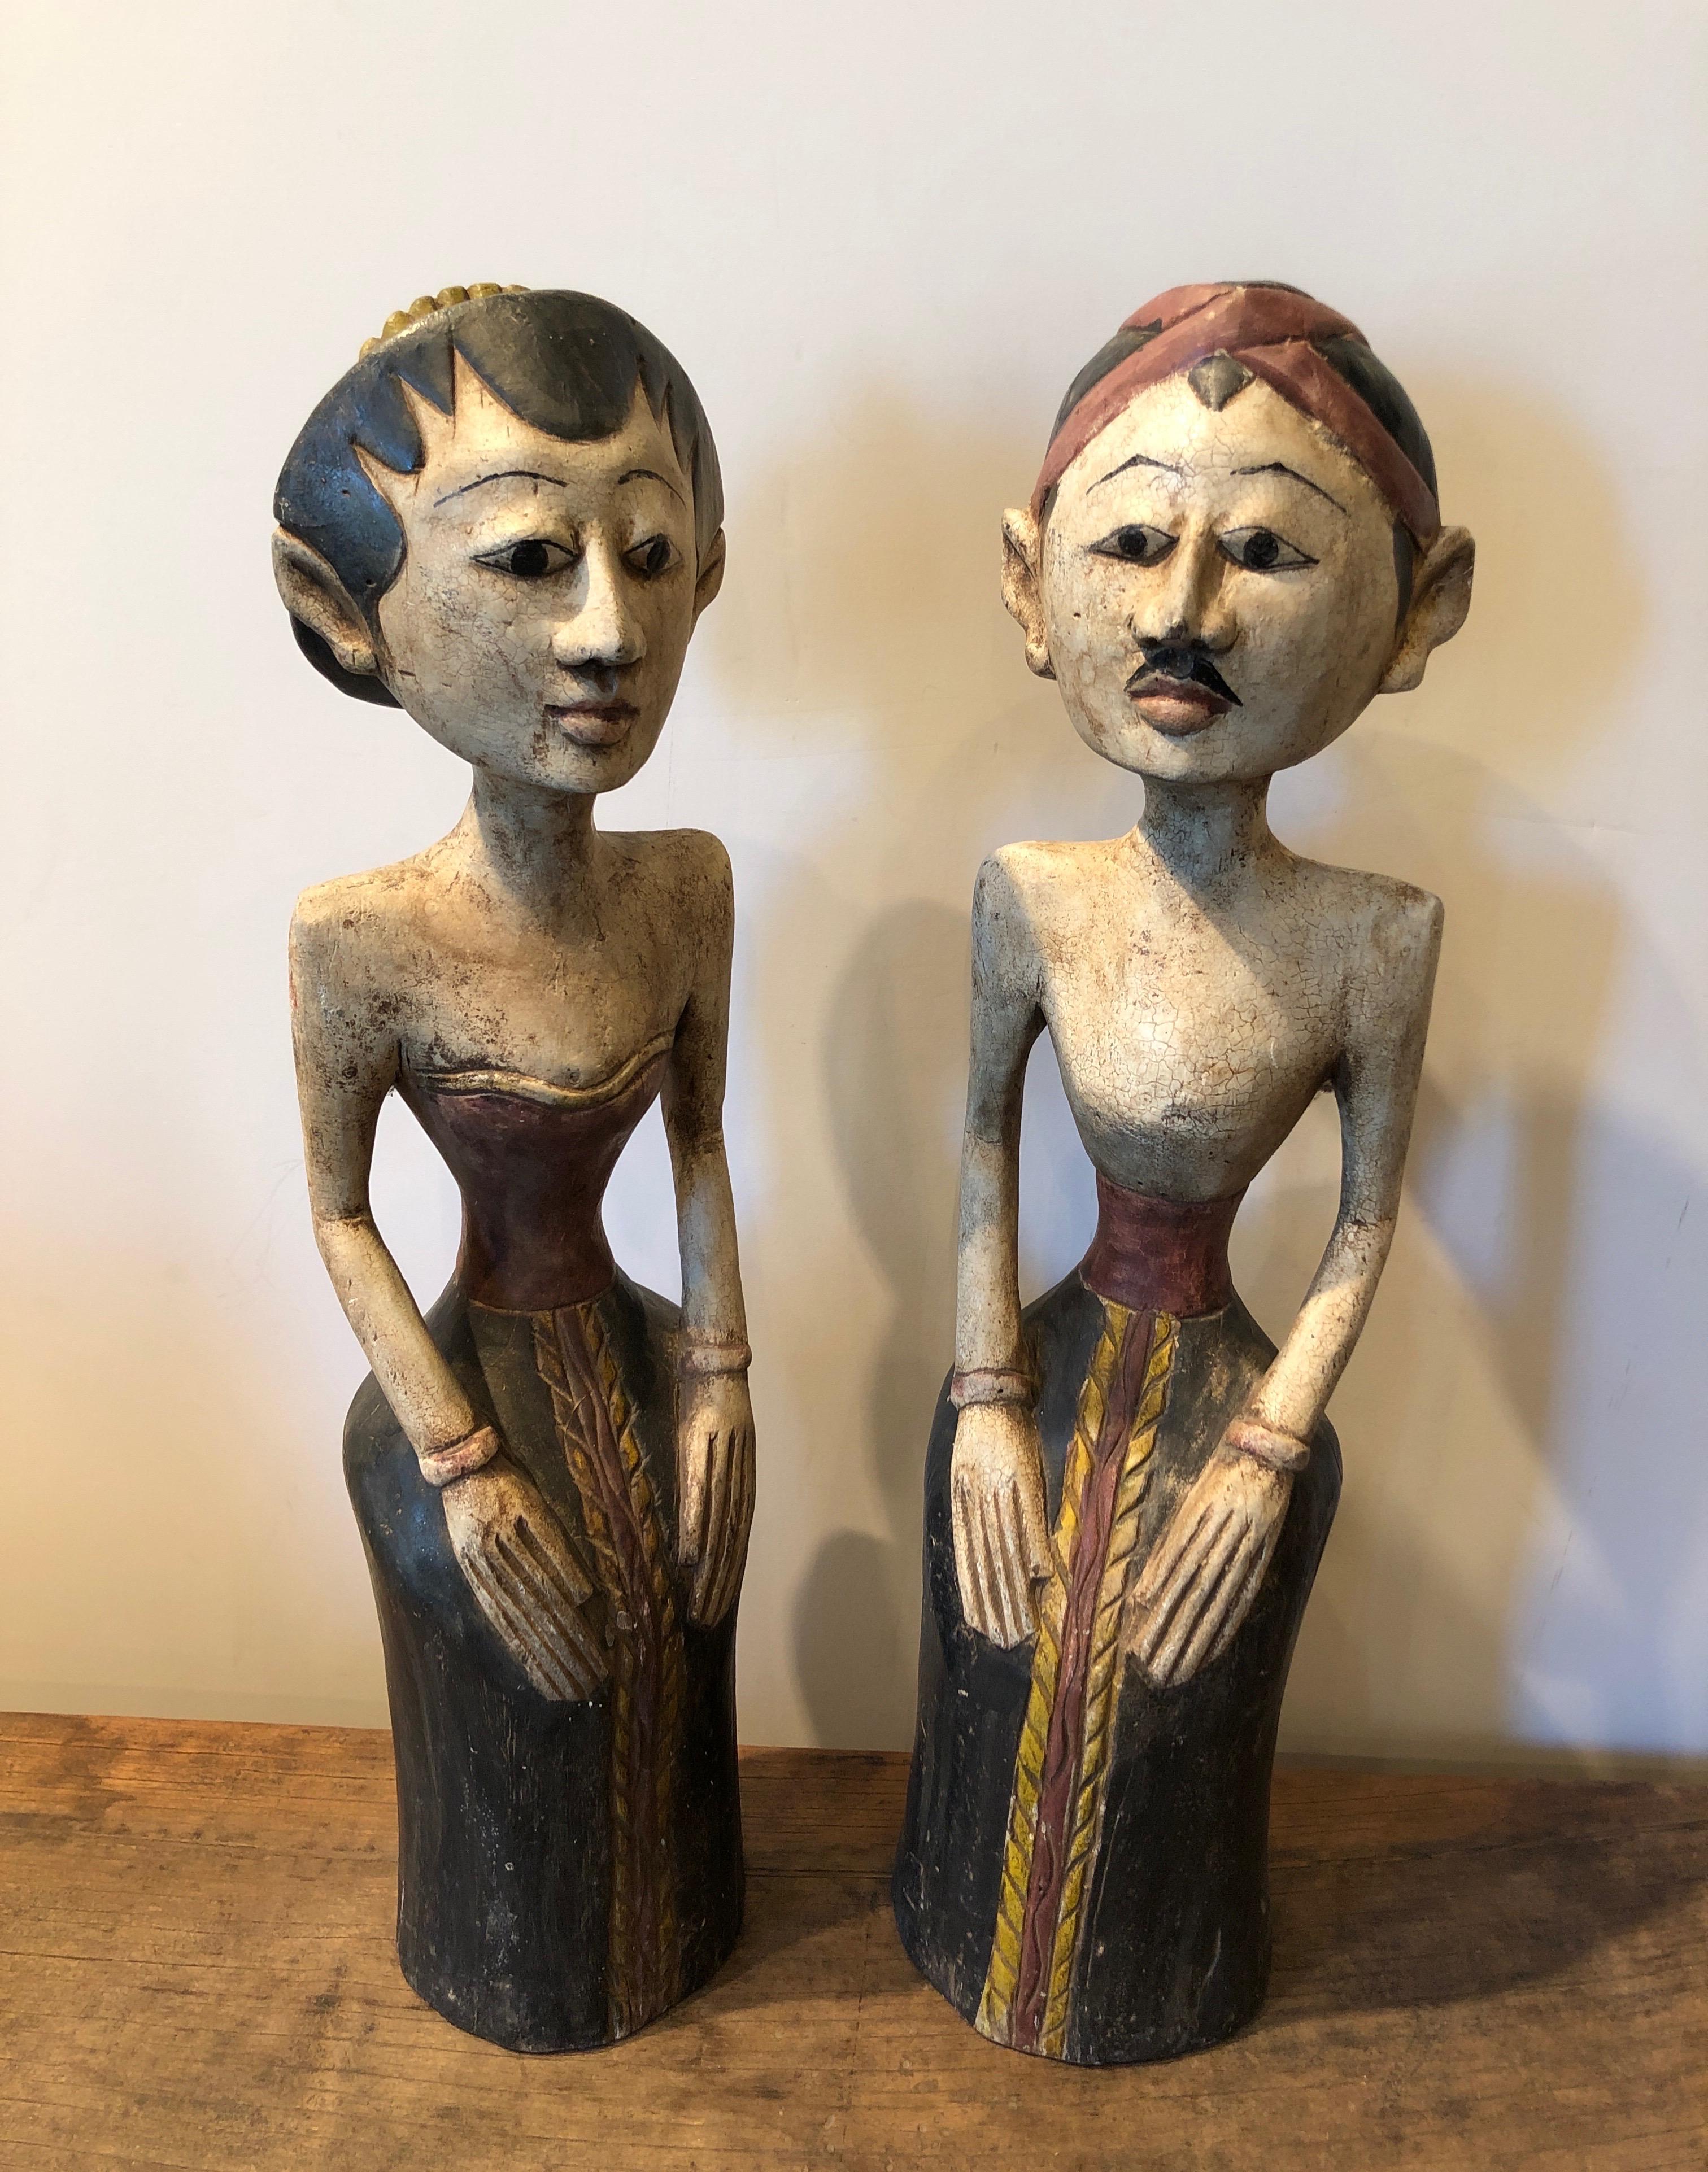 A pair of expertly hand carved, mid-century Loro Blonyo figures representing the inseparable couple. This graceful wedding couple is dressed as bride and groom. They are thought to bring fertility and prosperity. They will certainly bring beauty,